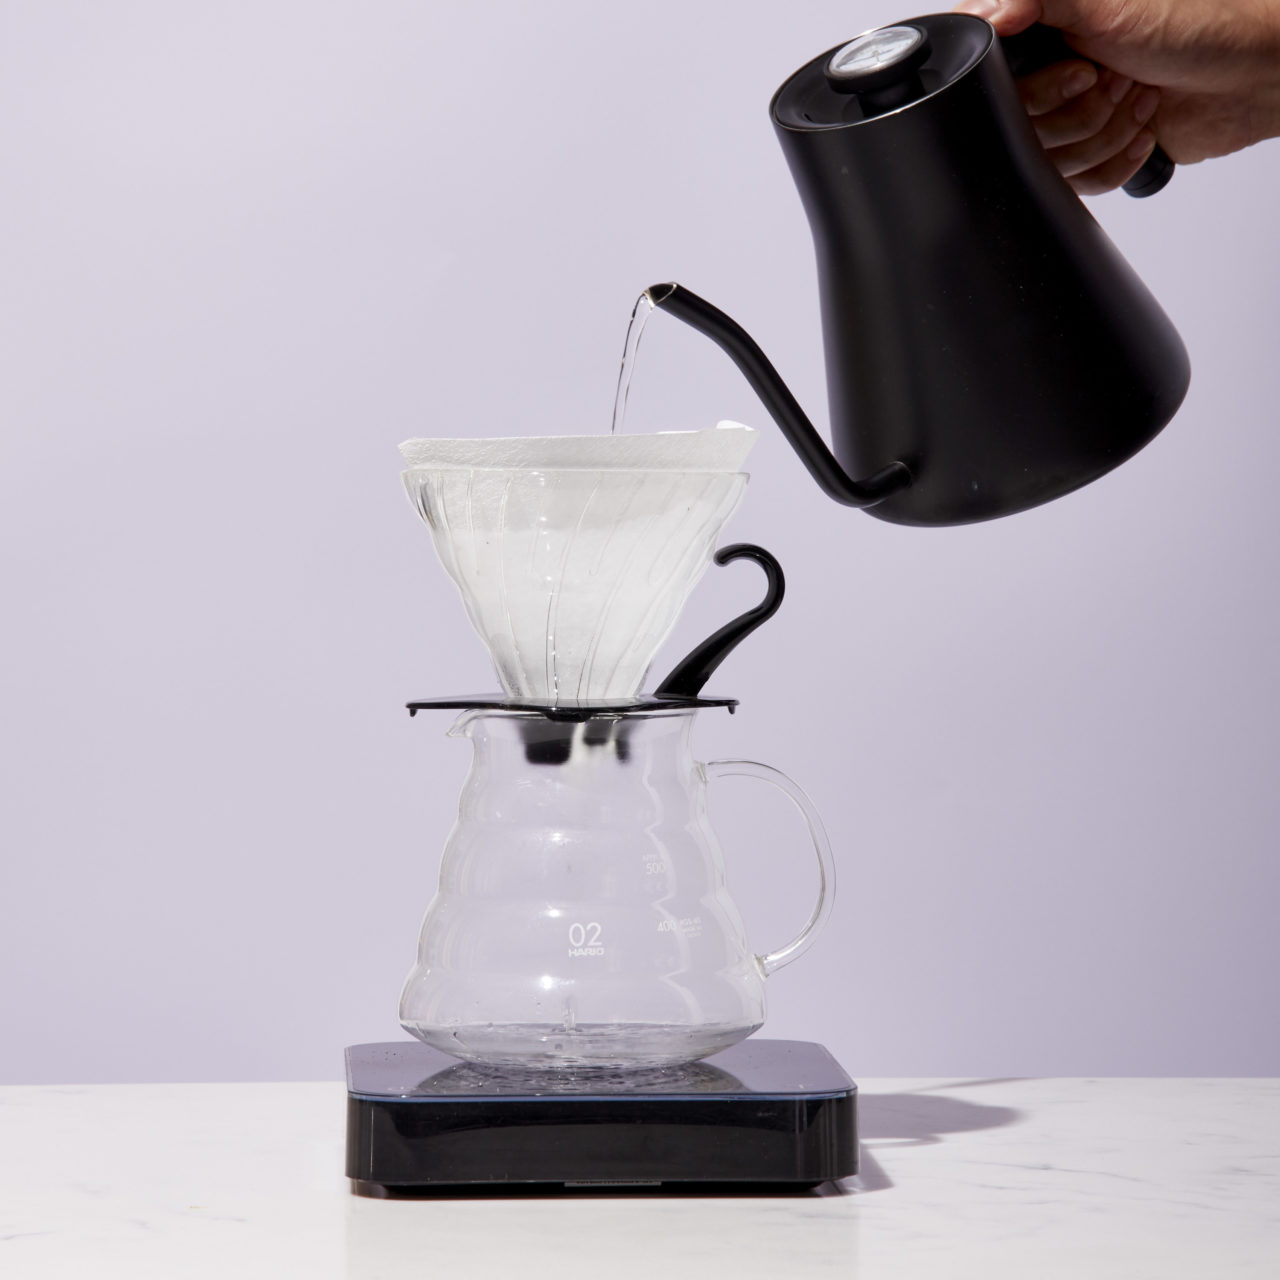 pouring water into chemex